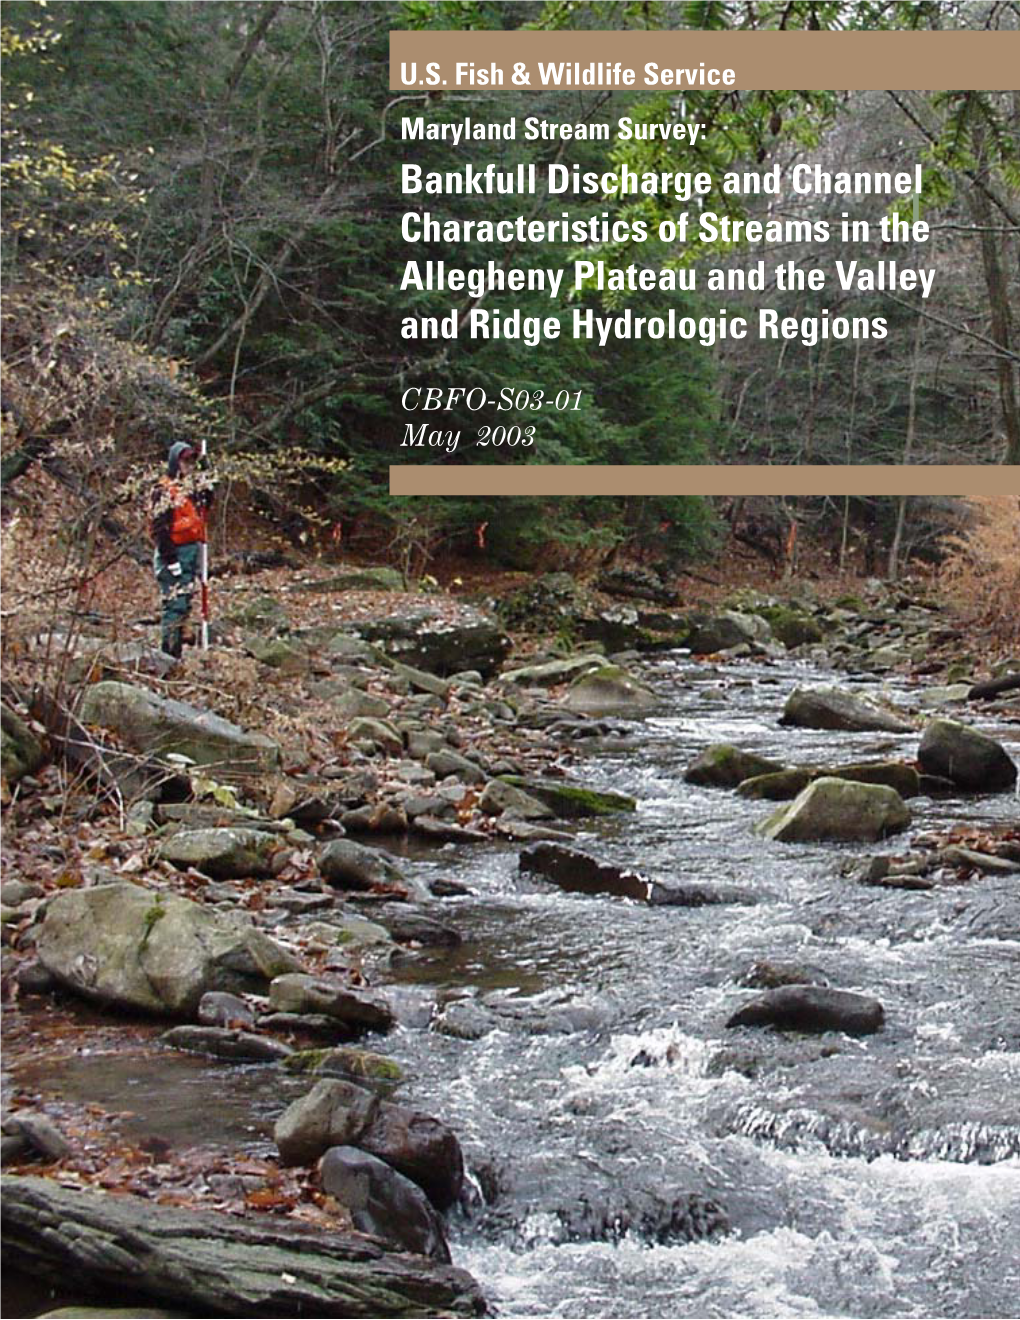 Bankfull Discharge and Channel Characteristics of Streams in the Allegheny Plateau and the Valley and Ridge Hydrologic Regions